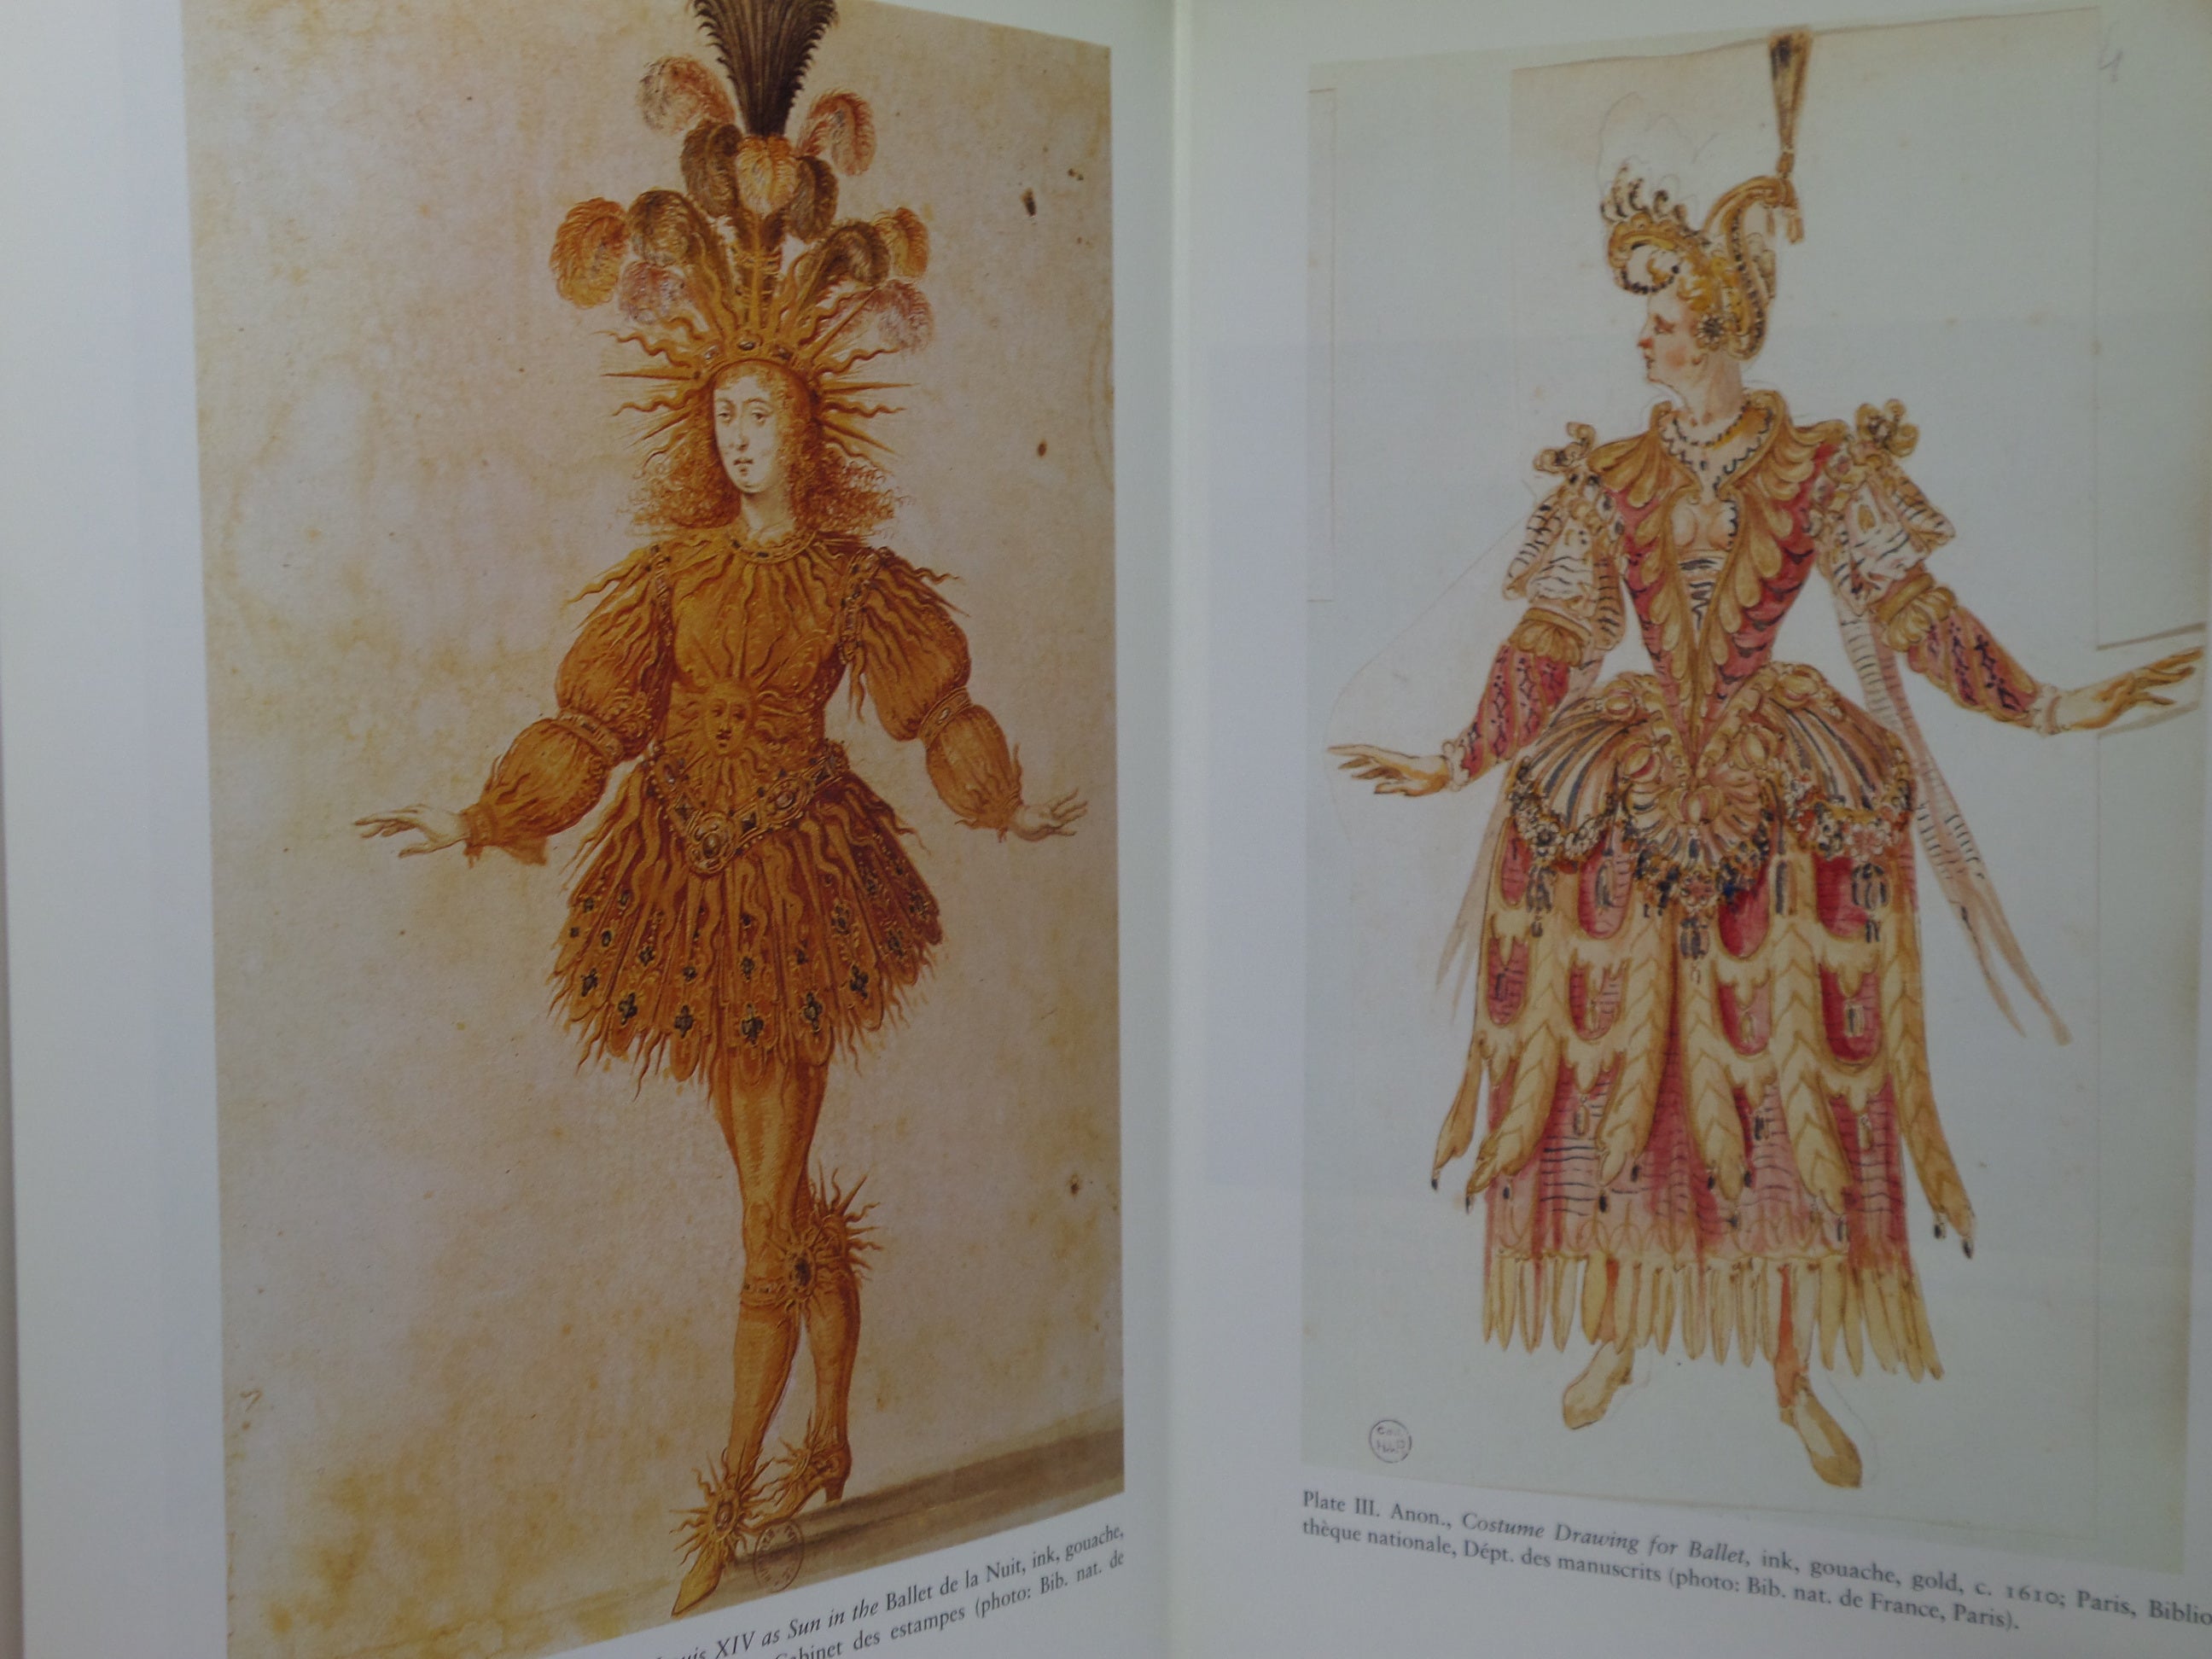 ART, DANCE, AND THE BODY IN FRENCH CULTURE OF THE ANCIEN REGIME BY SARAH COHEN